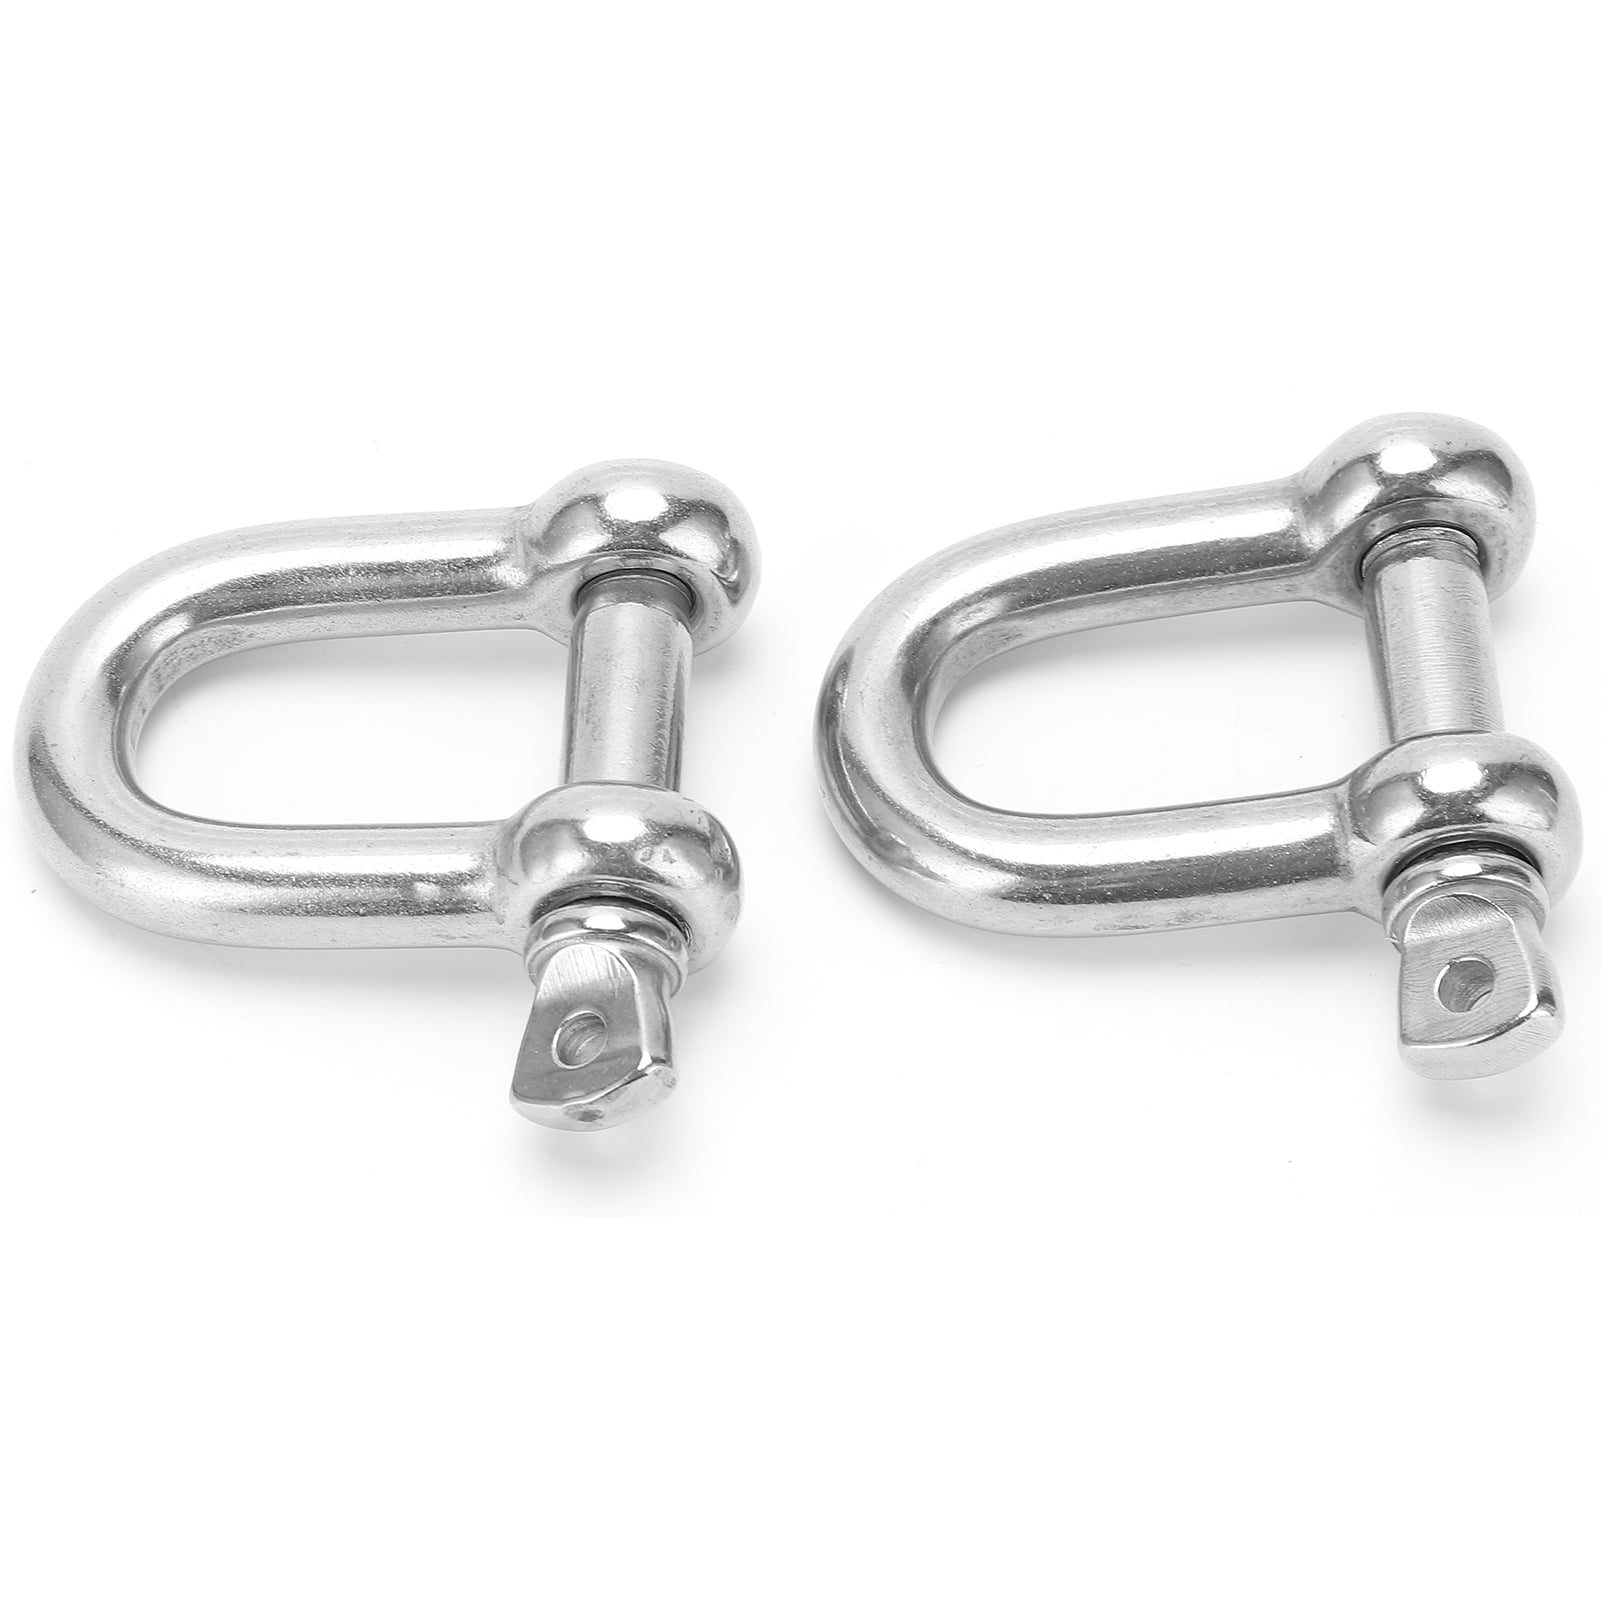 Stainless Steel D Shackle M4 M5 M6 M8 304 FREE SHIPPING Hot 